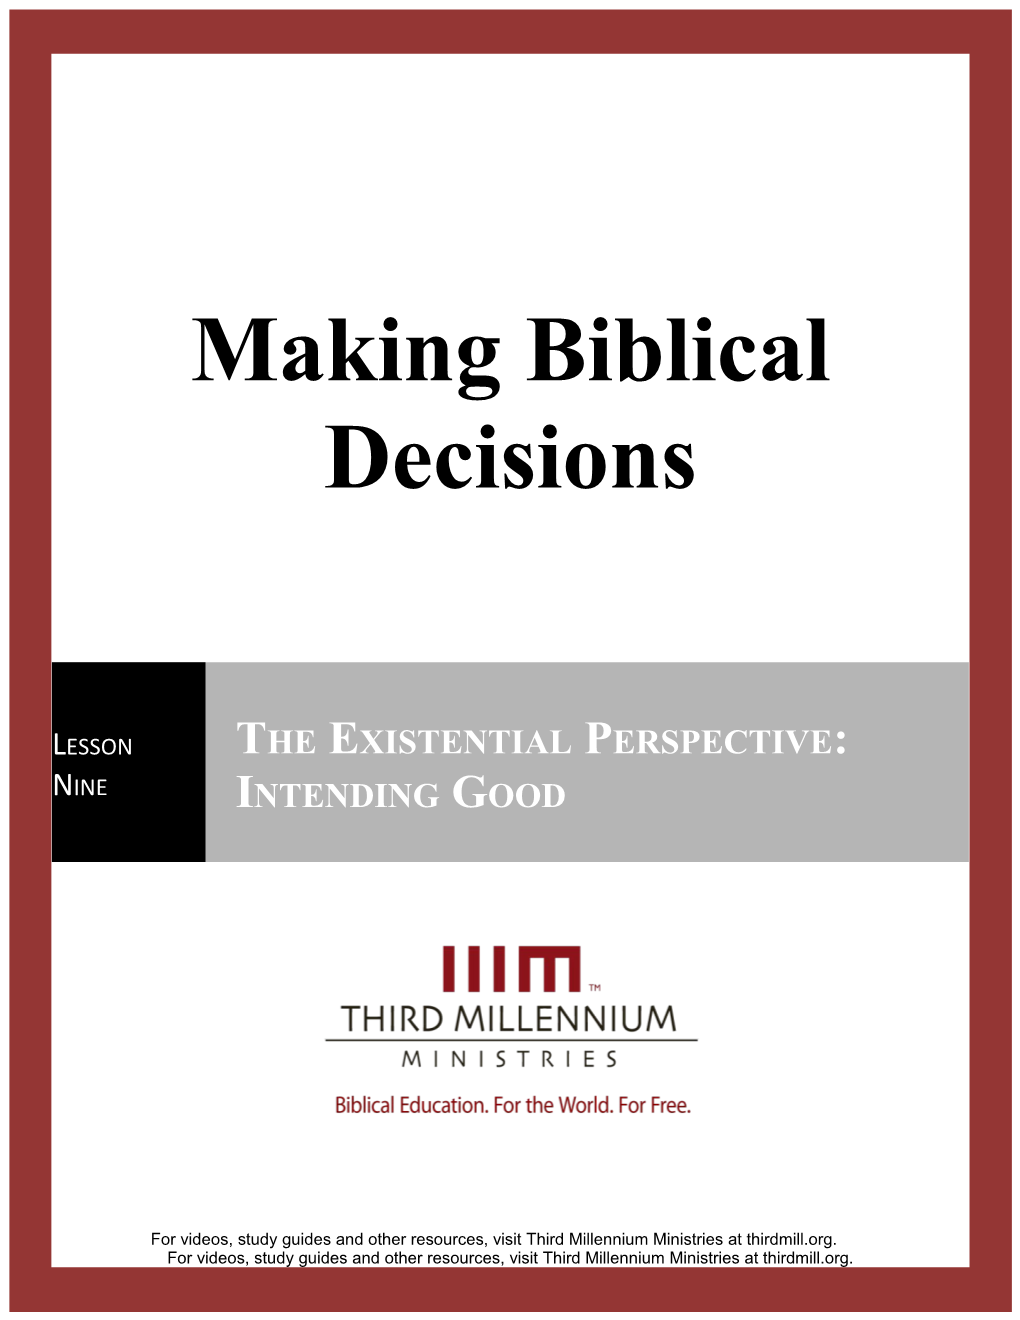 Making Biblical Decisions, Lesson 9